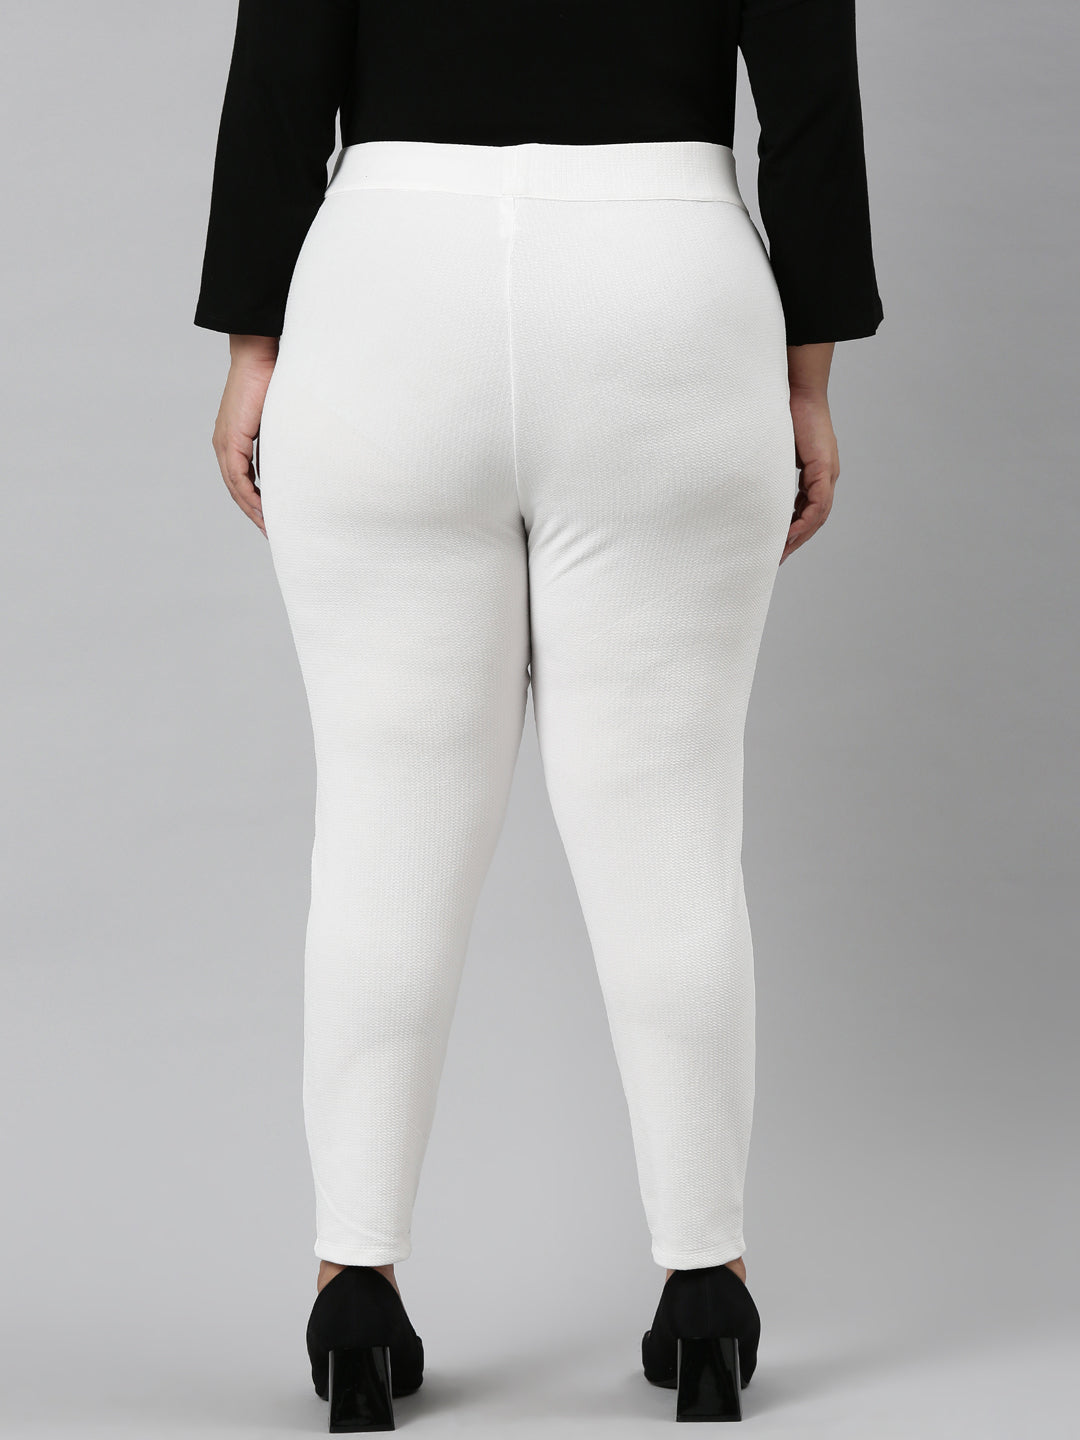 Plus Size white embossed stretch pants For Women L to 6XL  The Pink Moon